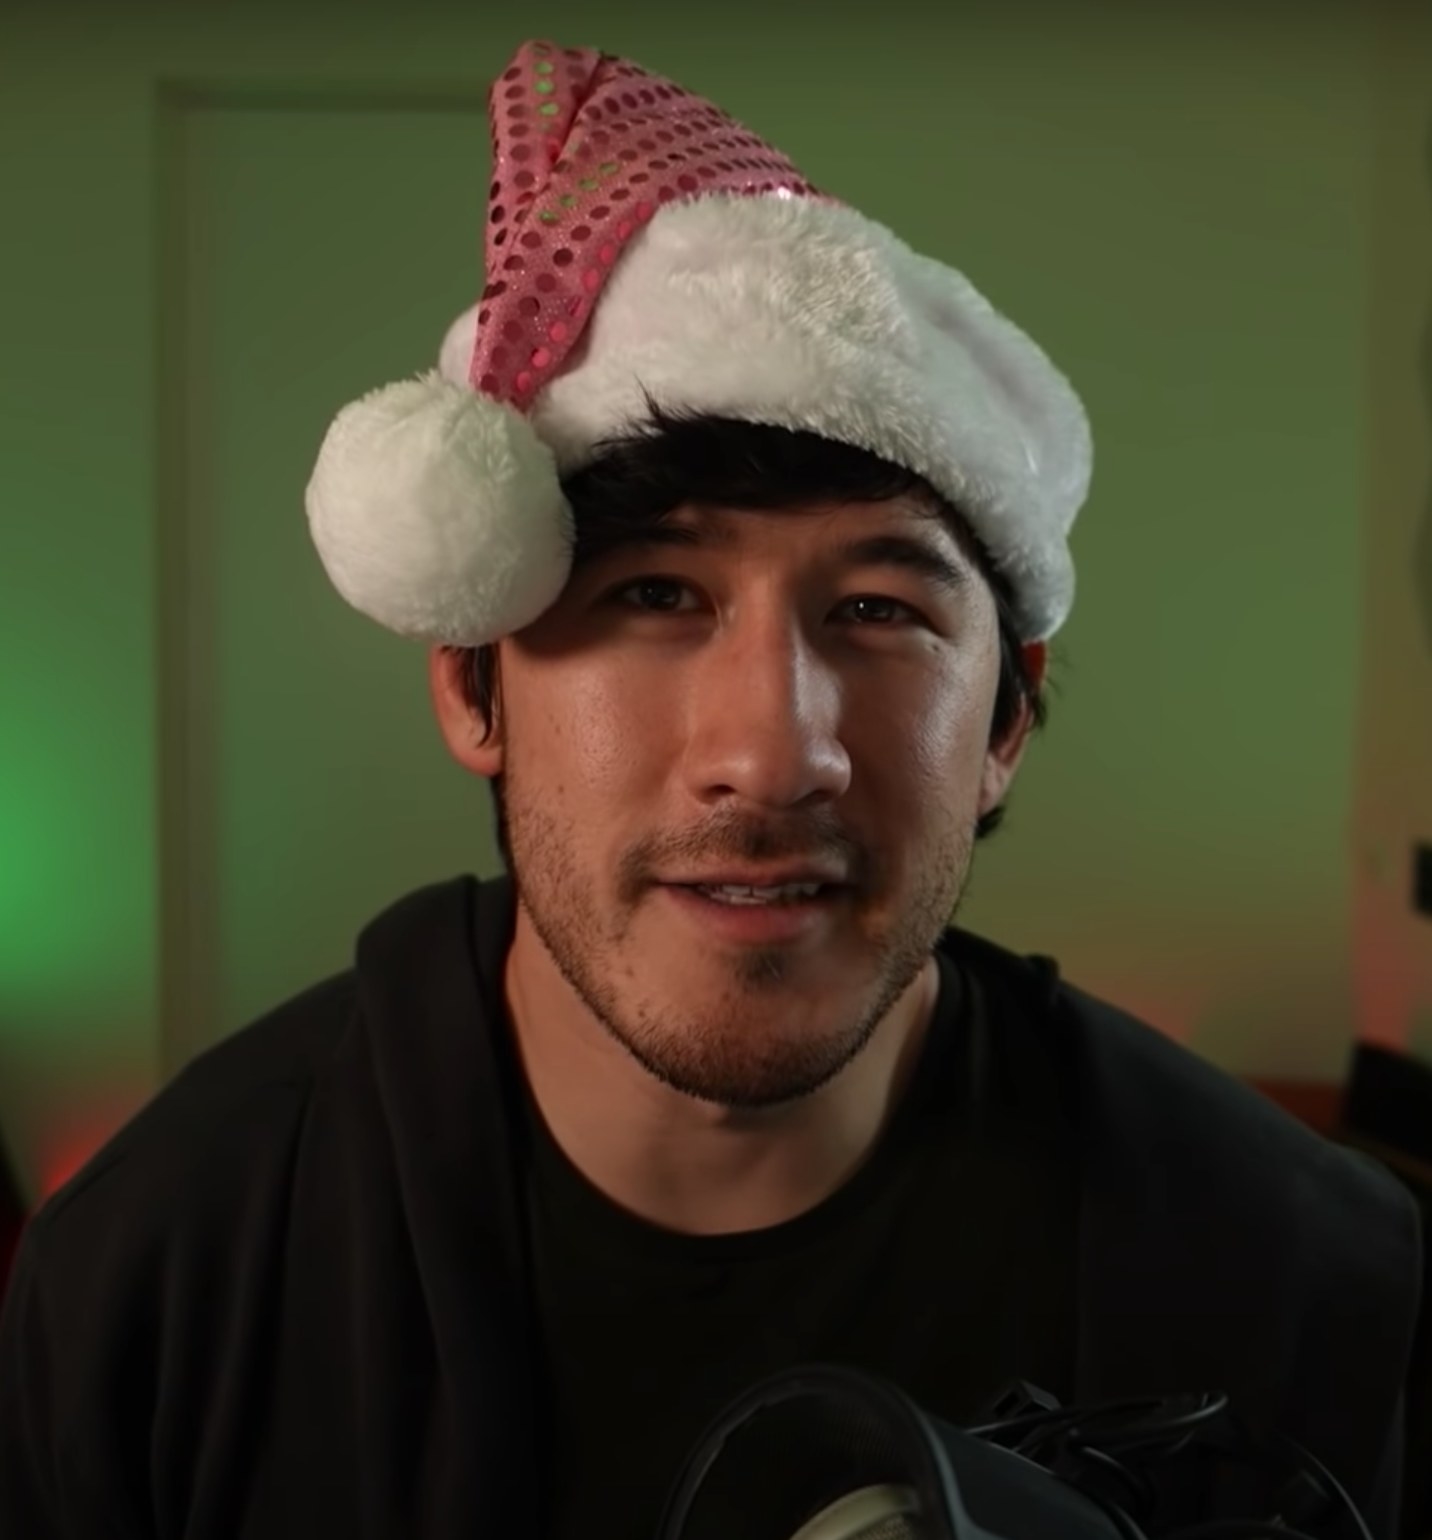 Mark Fischbach thanks his supporters in a December 2021 YouTube video